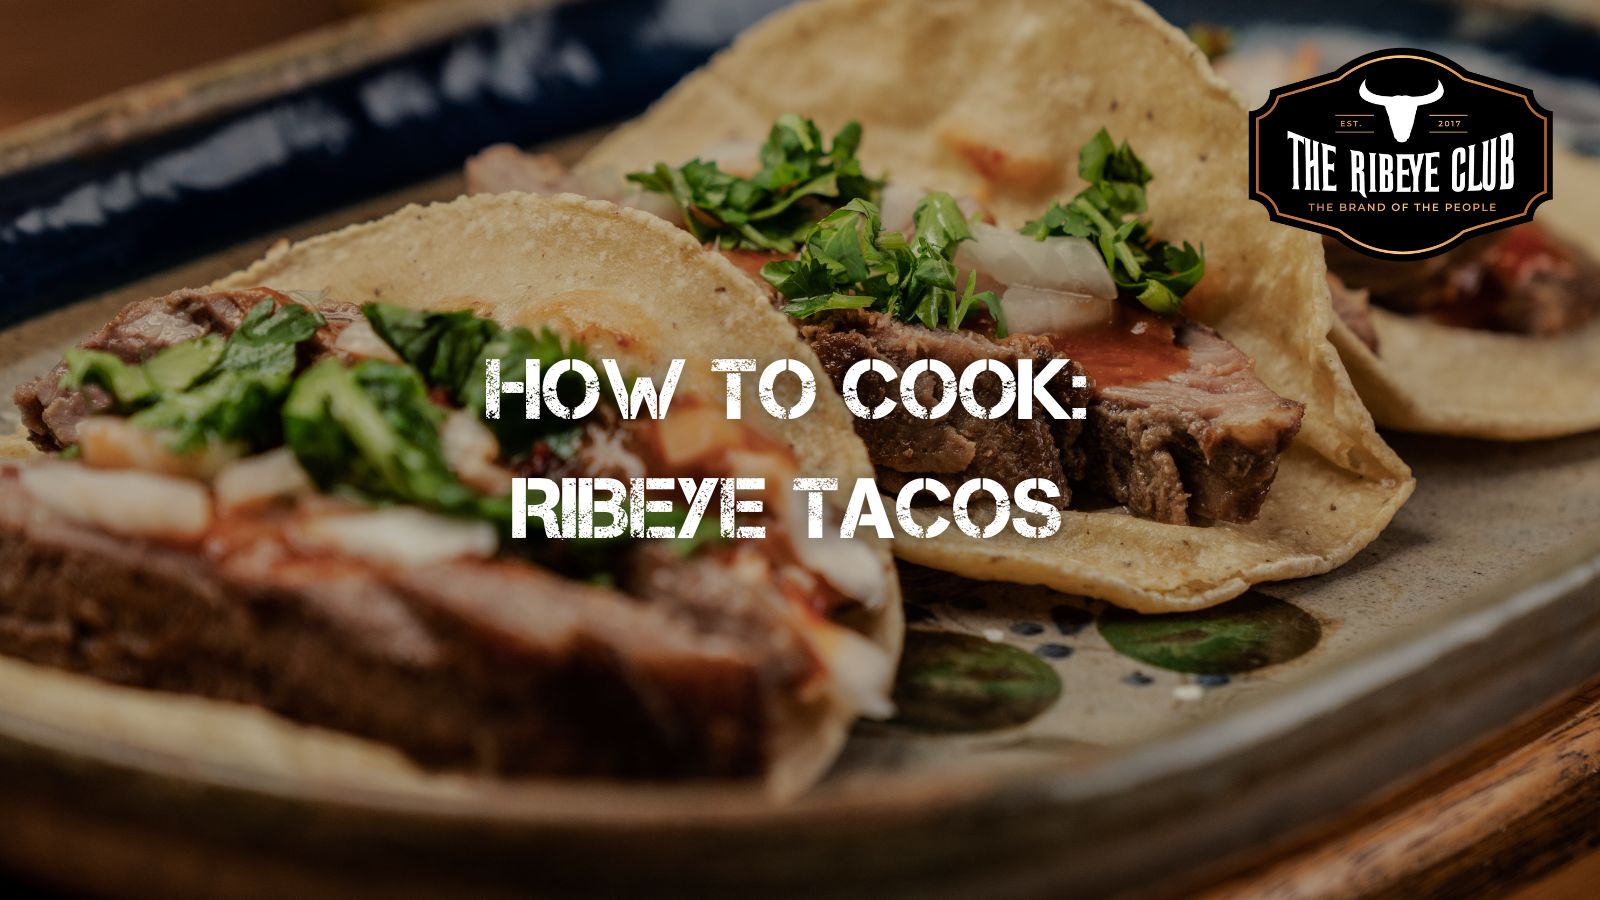 How to Cook: Ribeye Tacos ⠀